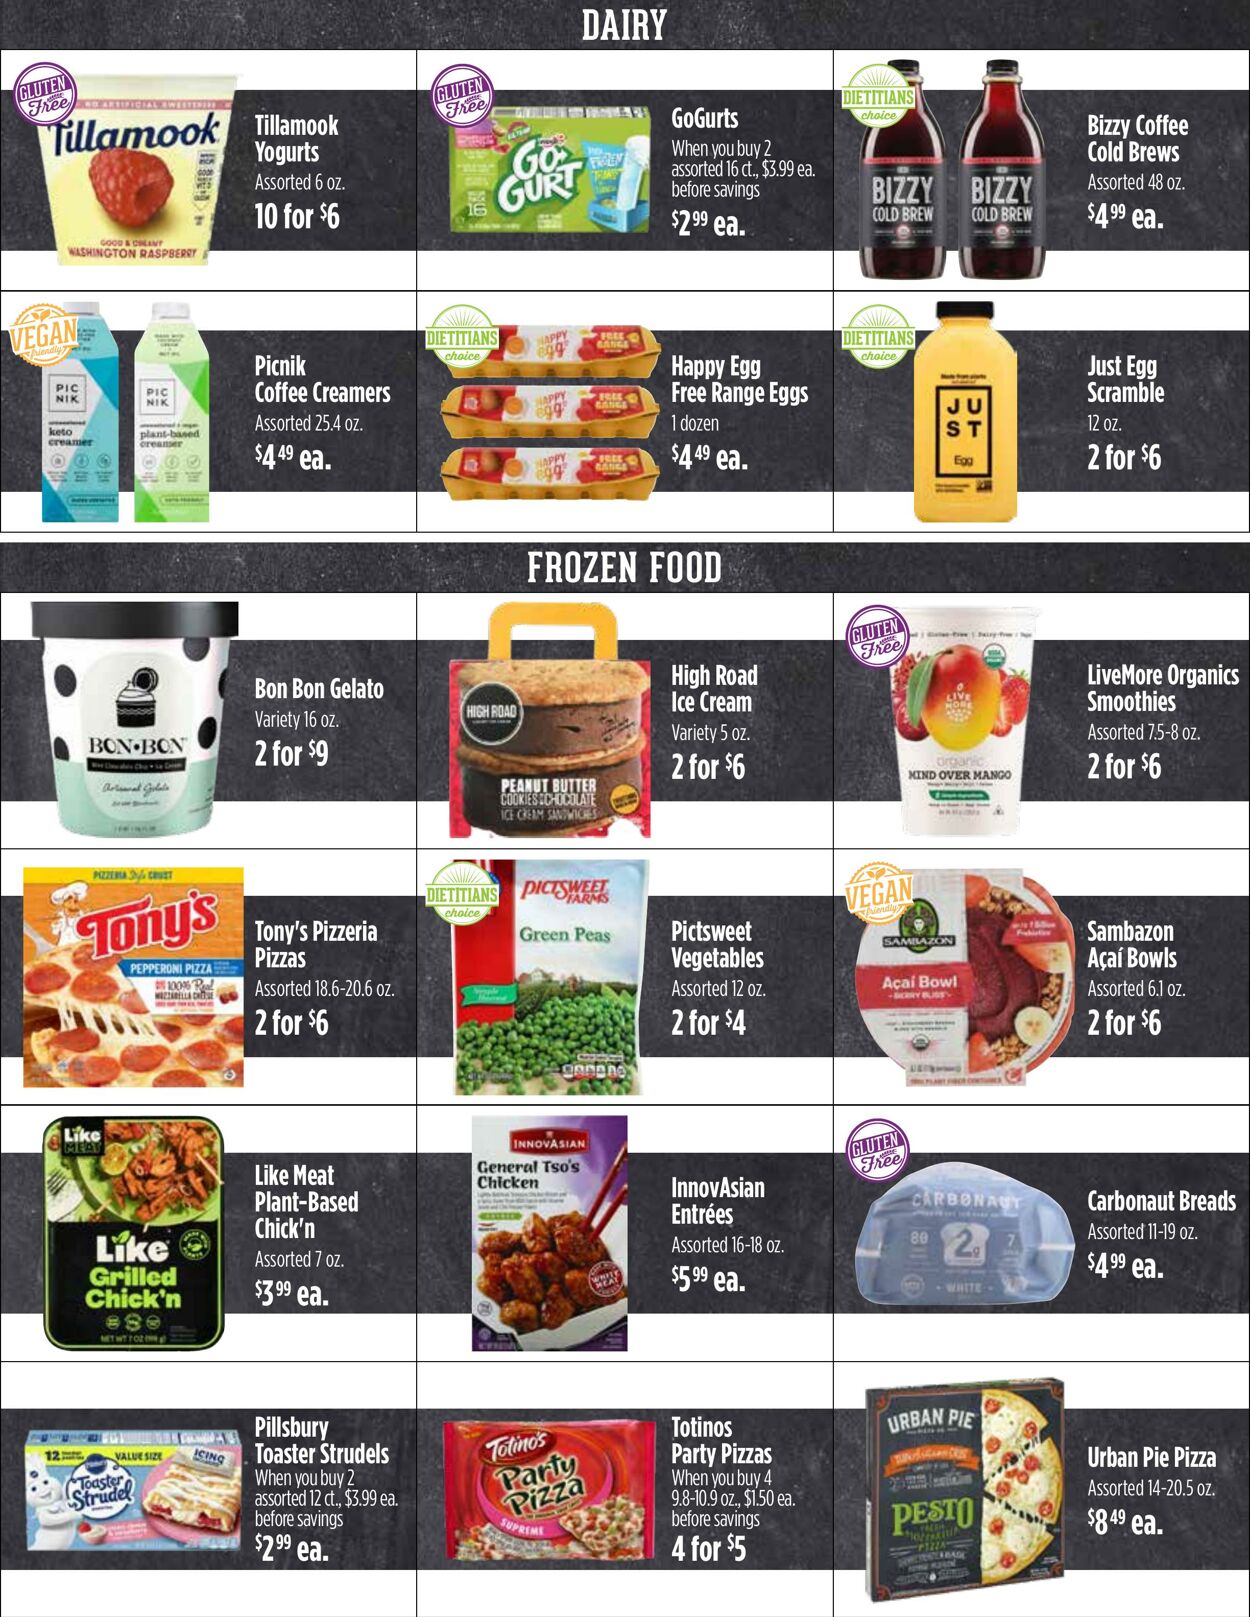 Weekly ad Harmons Grocery 08/16/2022 - 08/22/2022